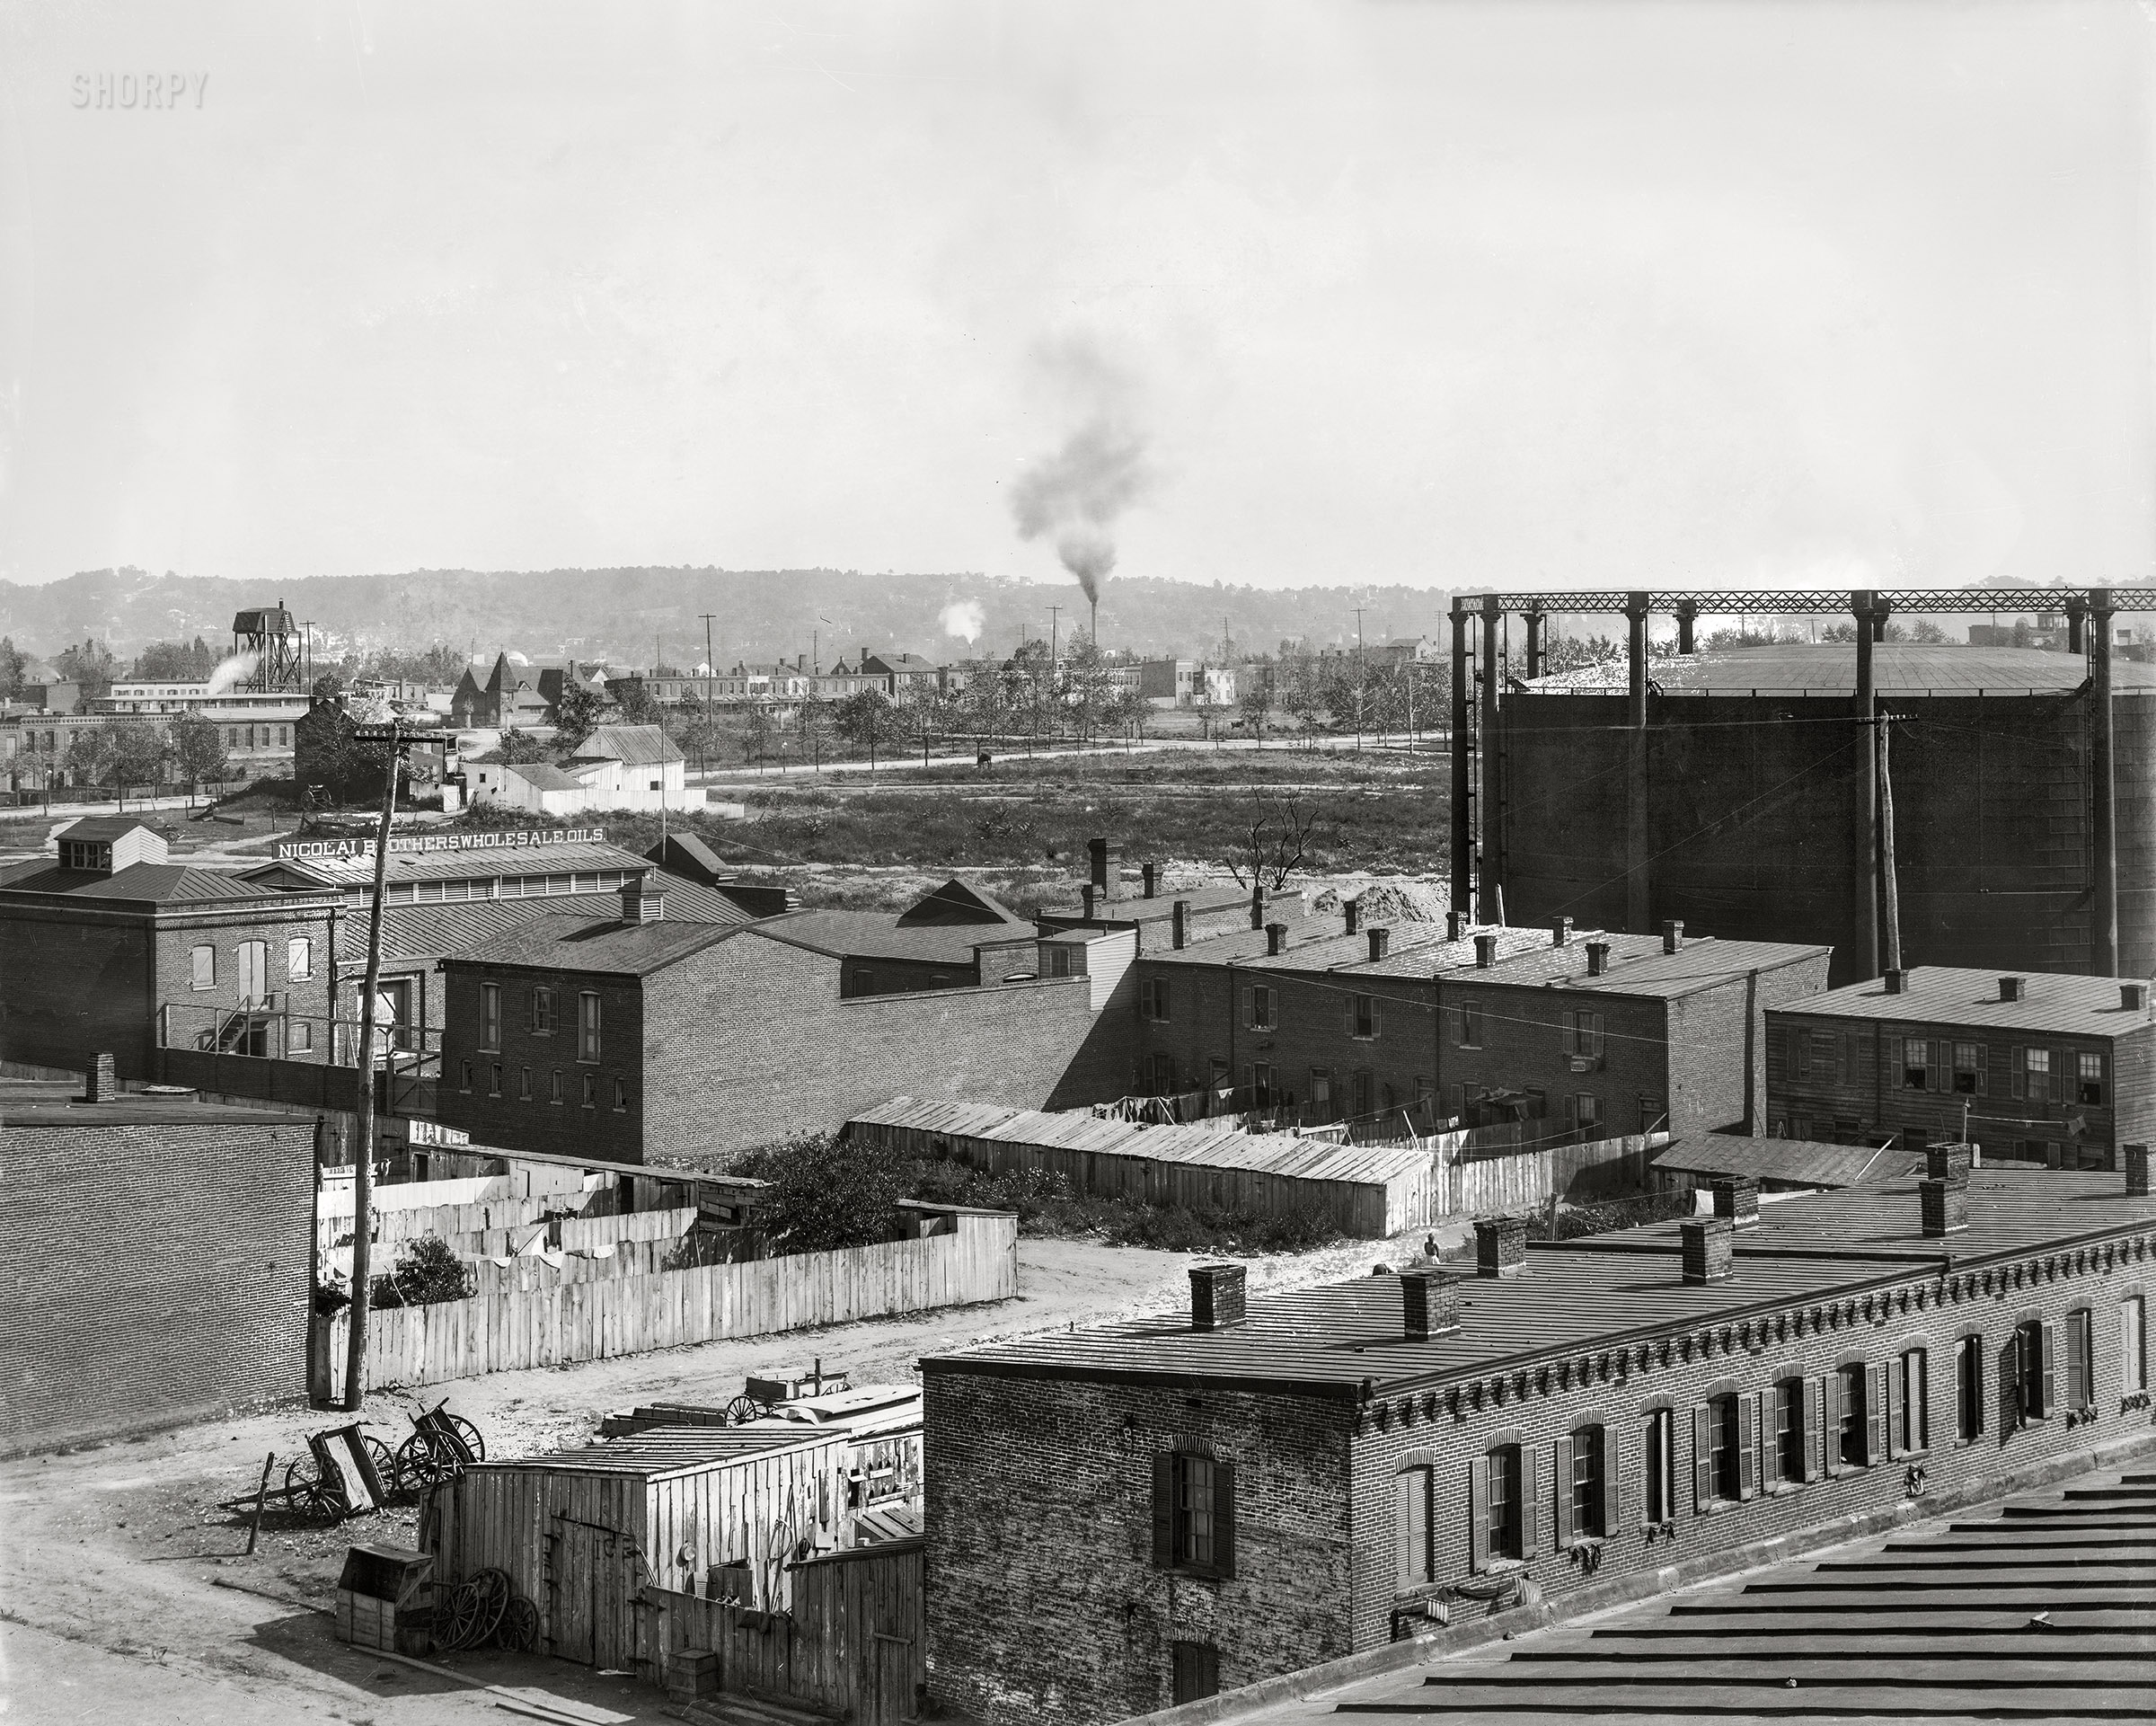 Washington, D.C., 1901. "Elevated view looking southeast from Randall Elementary School -- I Street at First Street S.W." Note the gas holder, or gasometer, at right; and black bunting or mourning crepe under the rowhouse windows, possibly in the aftermath of President McKinley's assassination. 8x10 glass negative, D.C. Street Survey Collection. View full size.